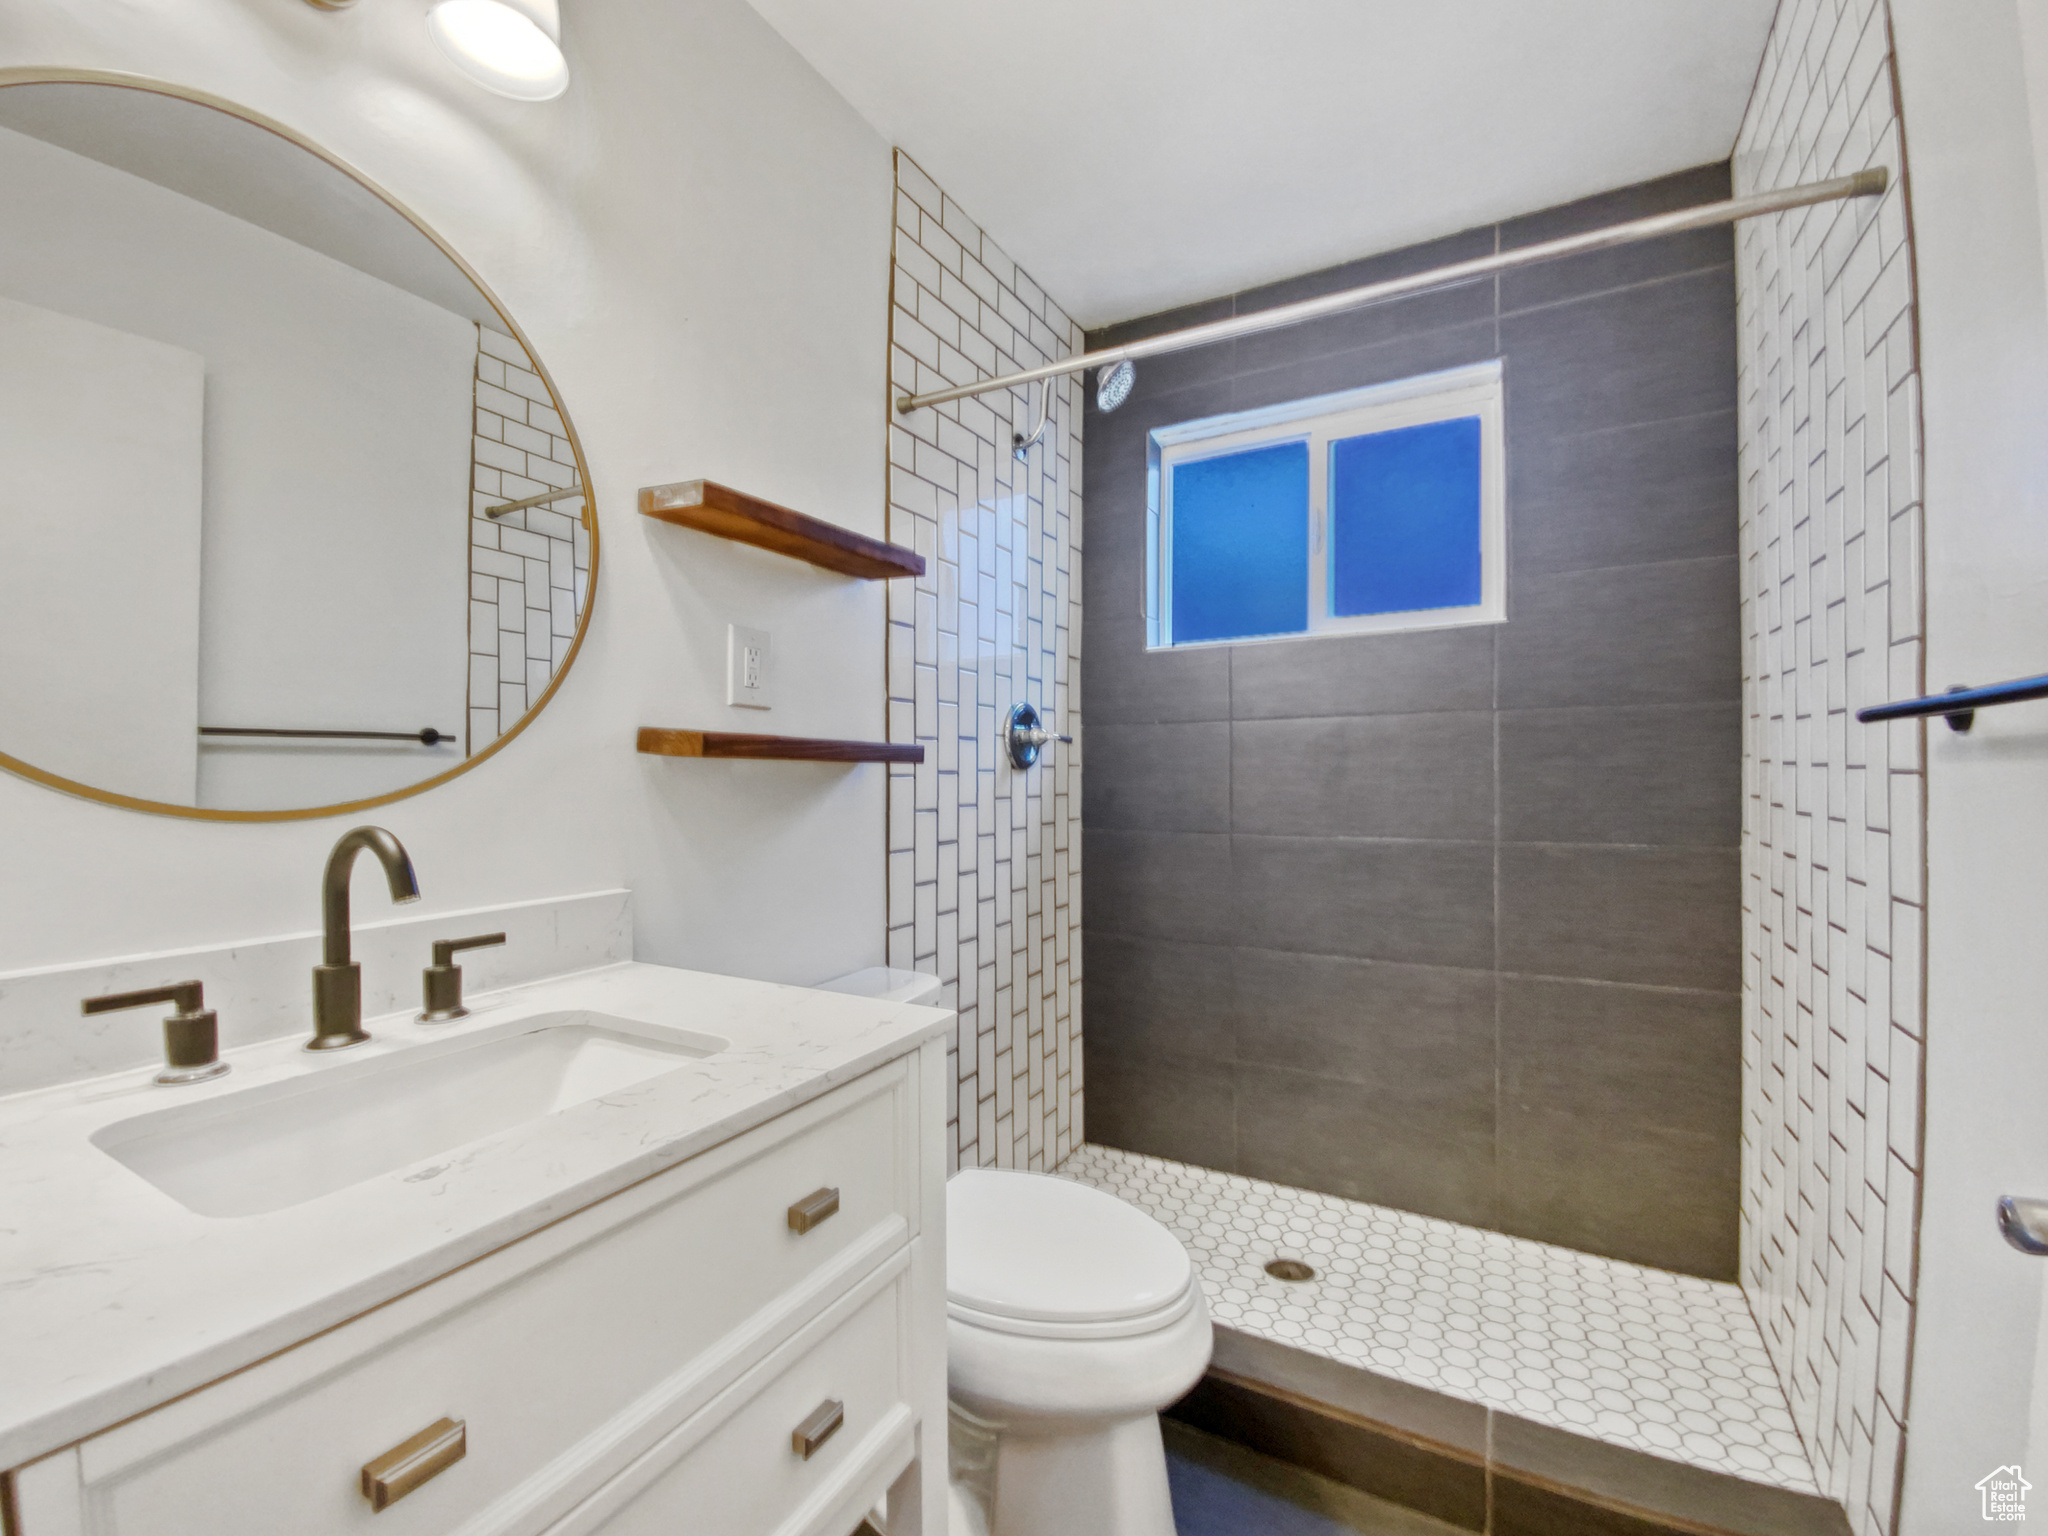 Bathroom with vanity with extensive cabinet space, a tile shower, and toilet